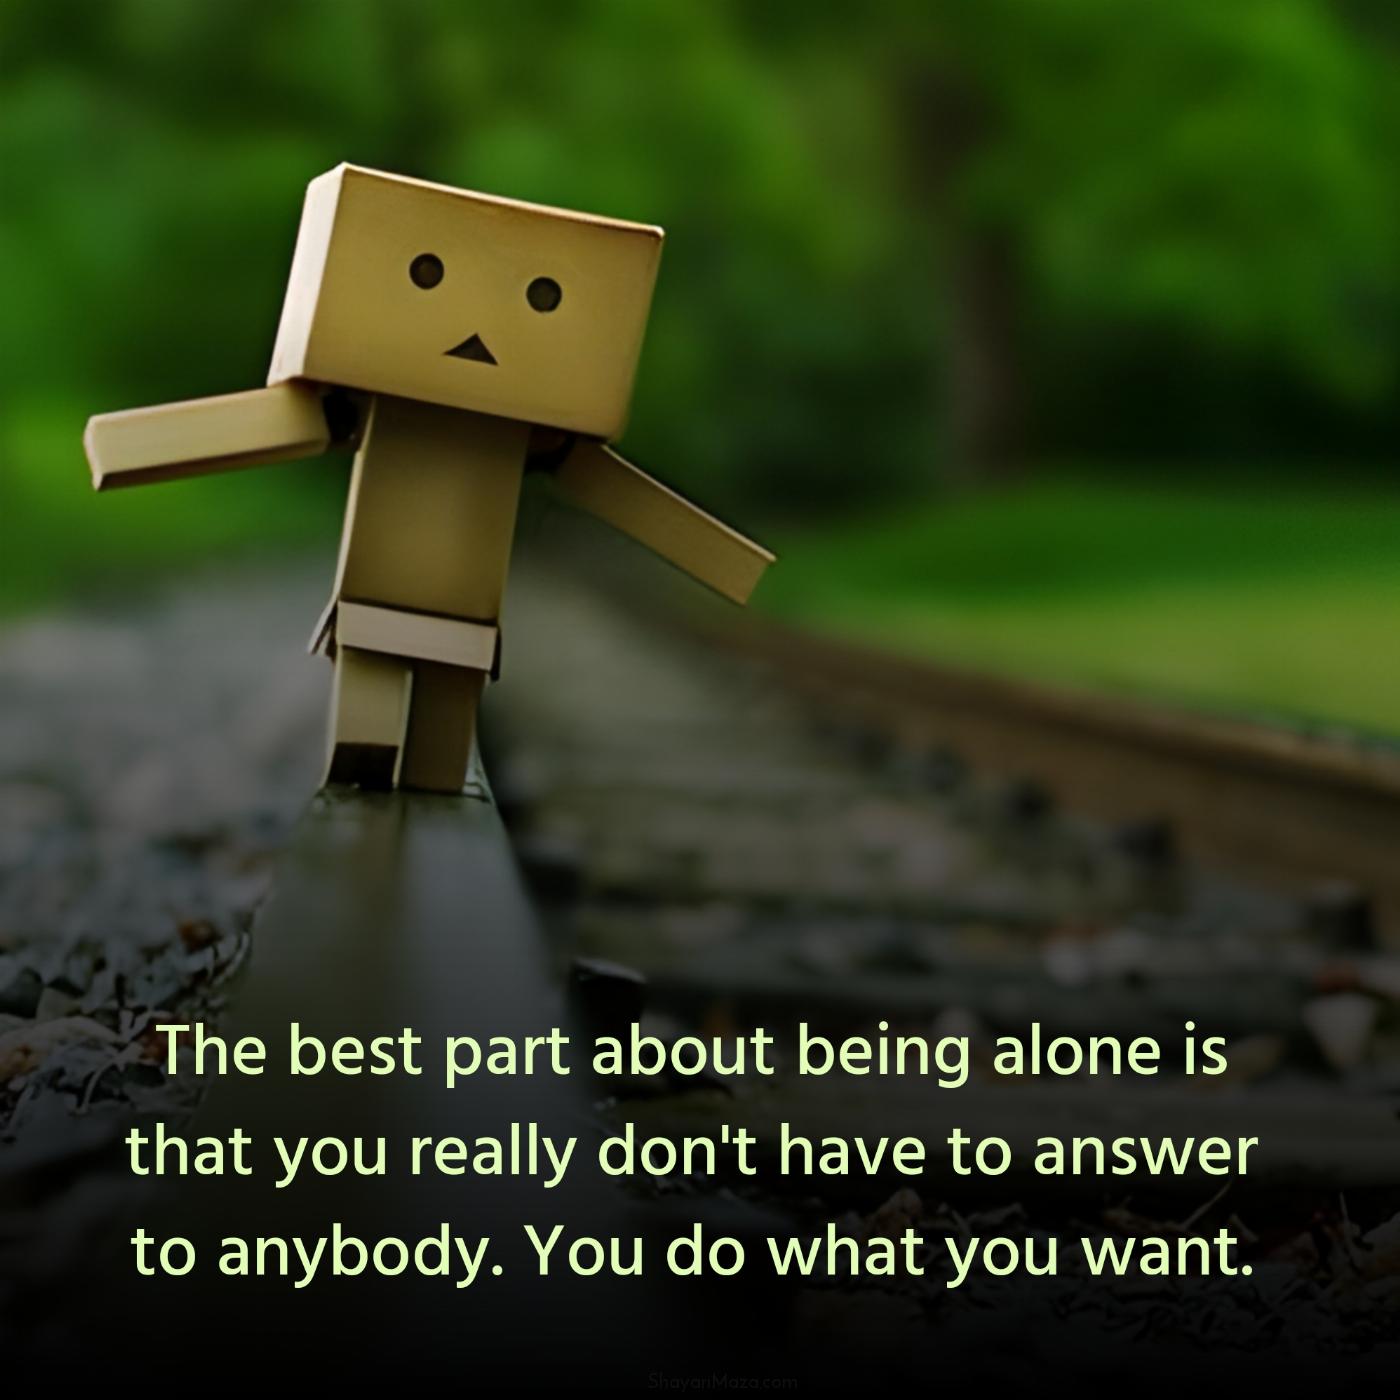 The best part about being alone is that you really don't have to answer